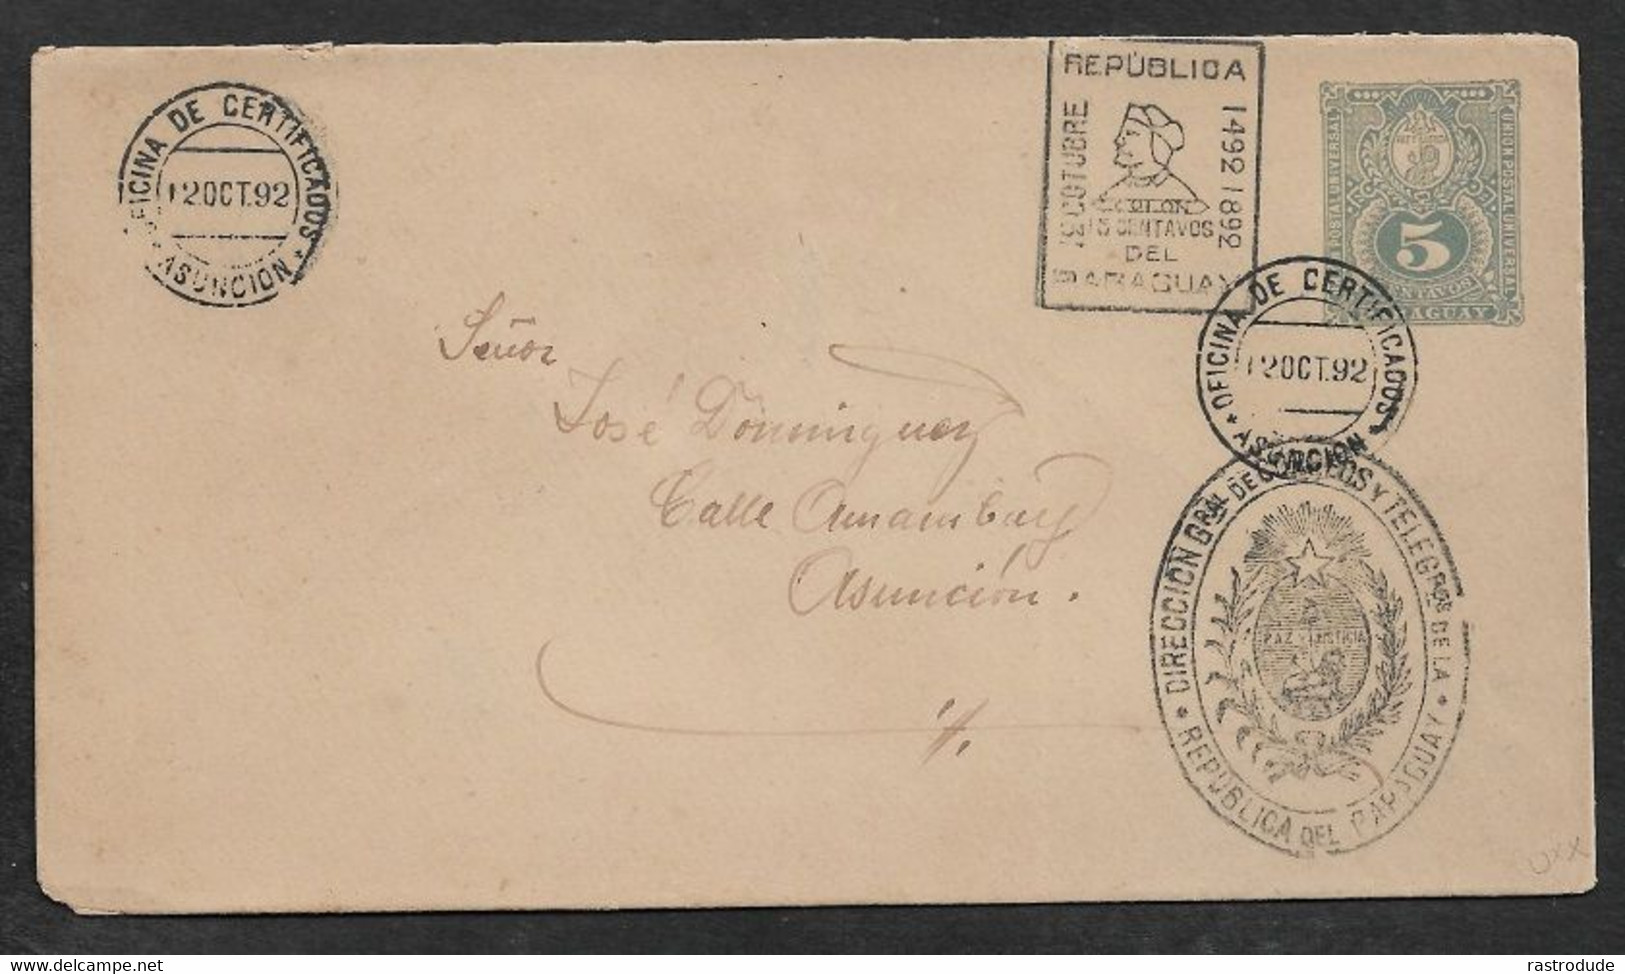 11892 5c POSTAL STATIONERY CARD - 500 YEARS COLUMBUS ANNIVERSARY From The DIRECCION Gral. De CORREOS - Paraguay